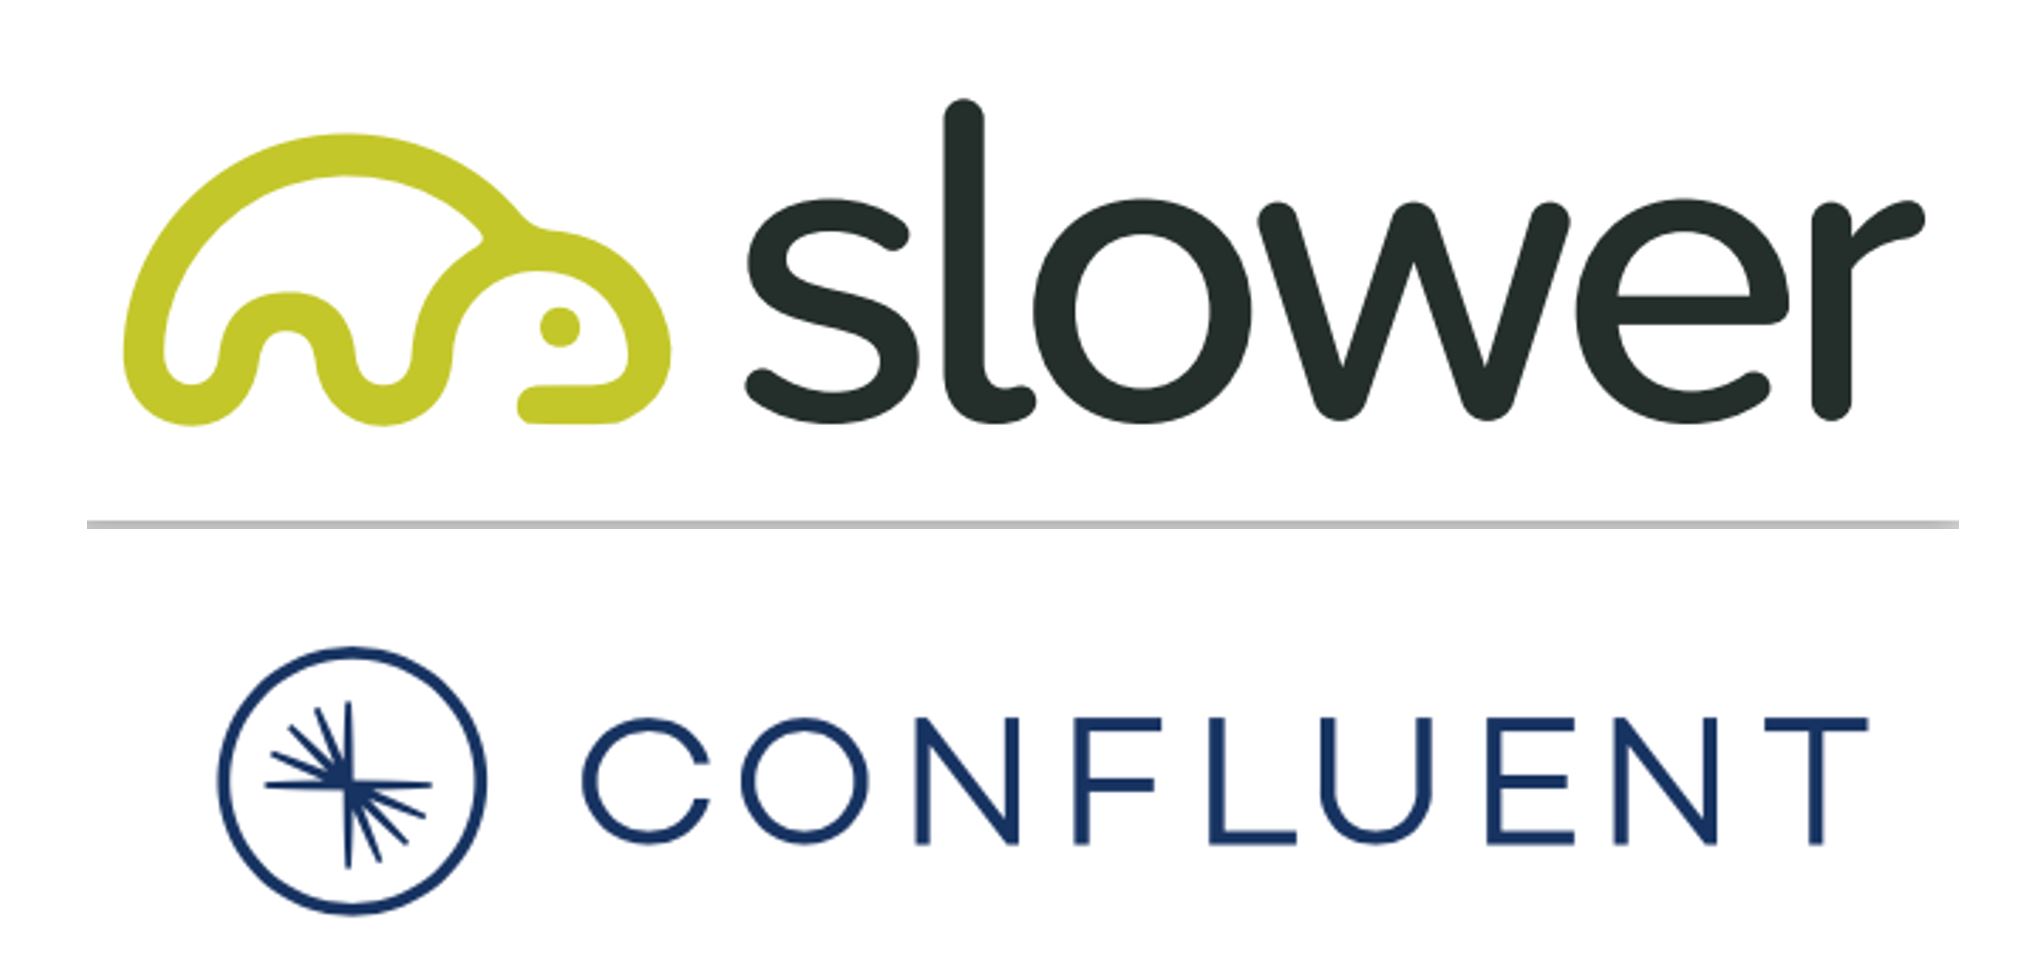 Confluent and Slower